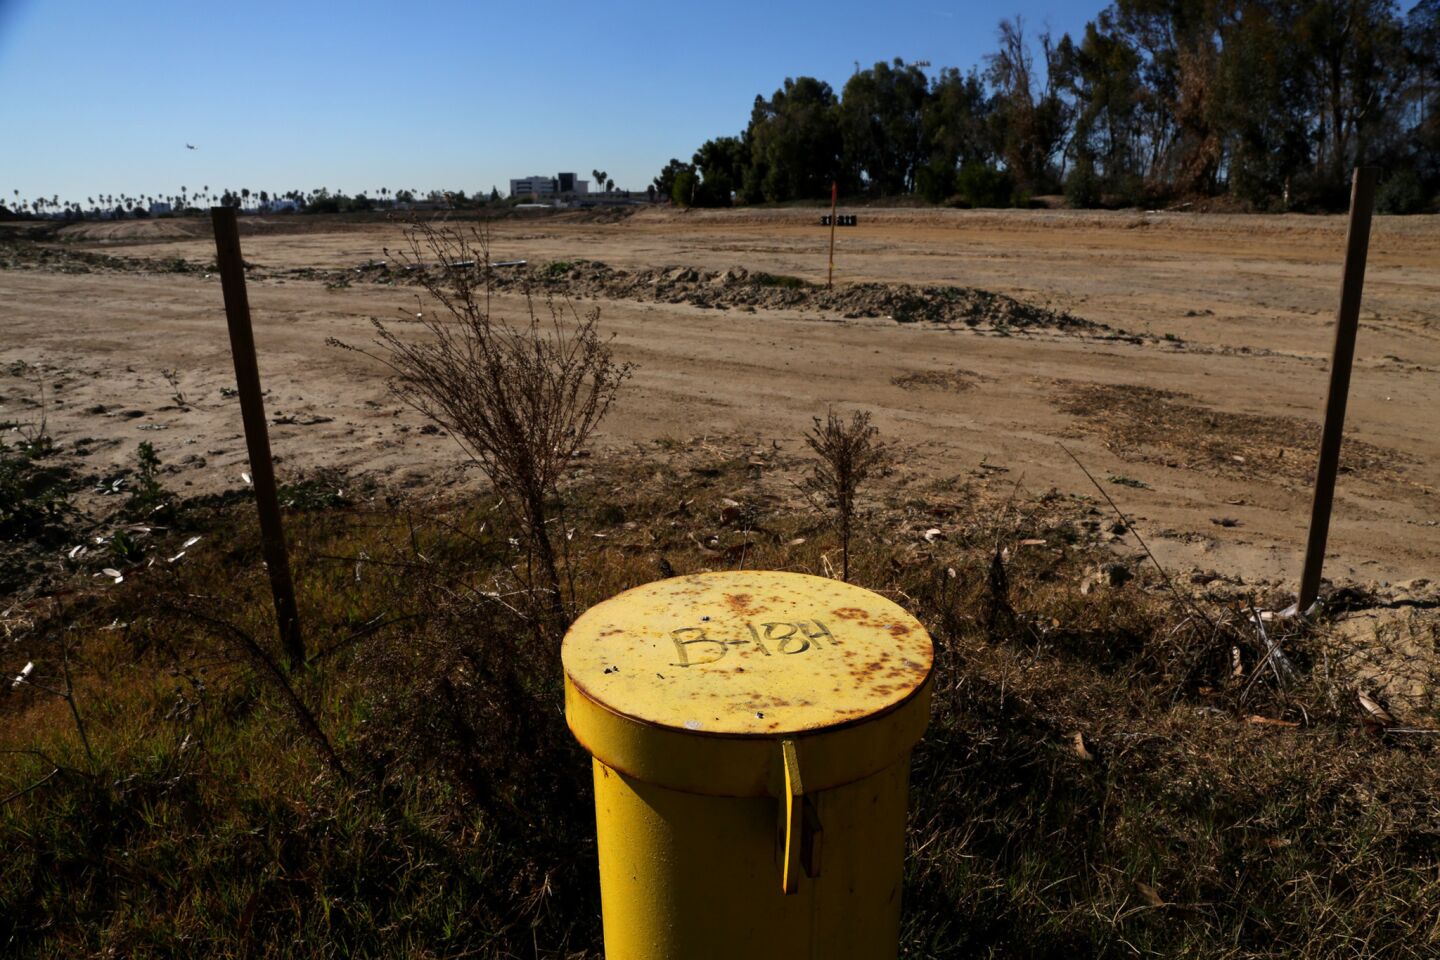 A yellow pipe marks the spot where the 50-yard line will be at the NFL stadium being constructed at the former Hollywood Park site in Inglewood.